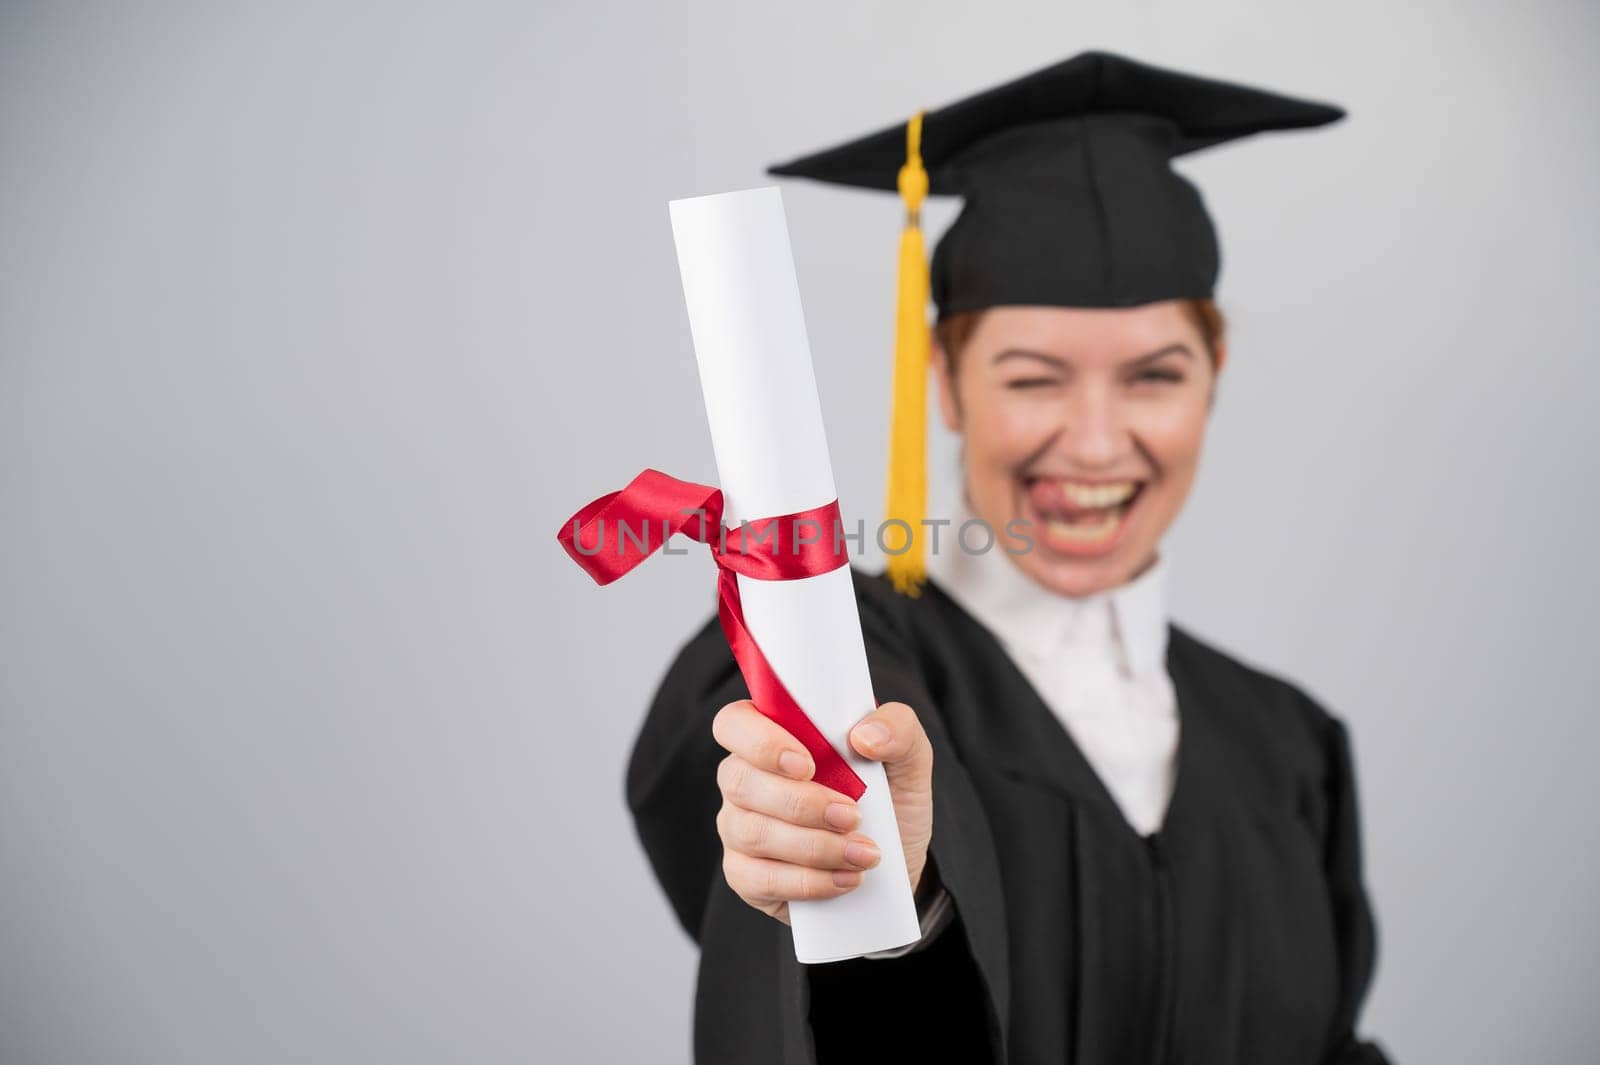 Emotional woman in graduate gown holding diploma in foreground. by mrwed54